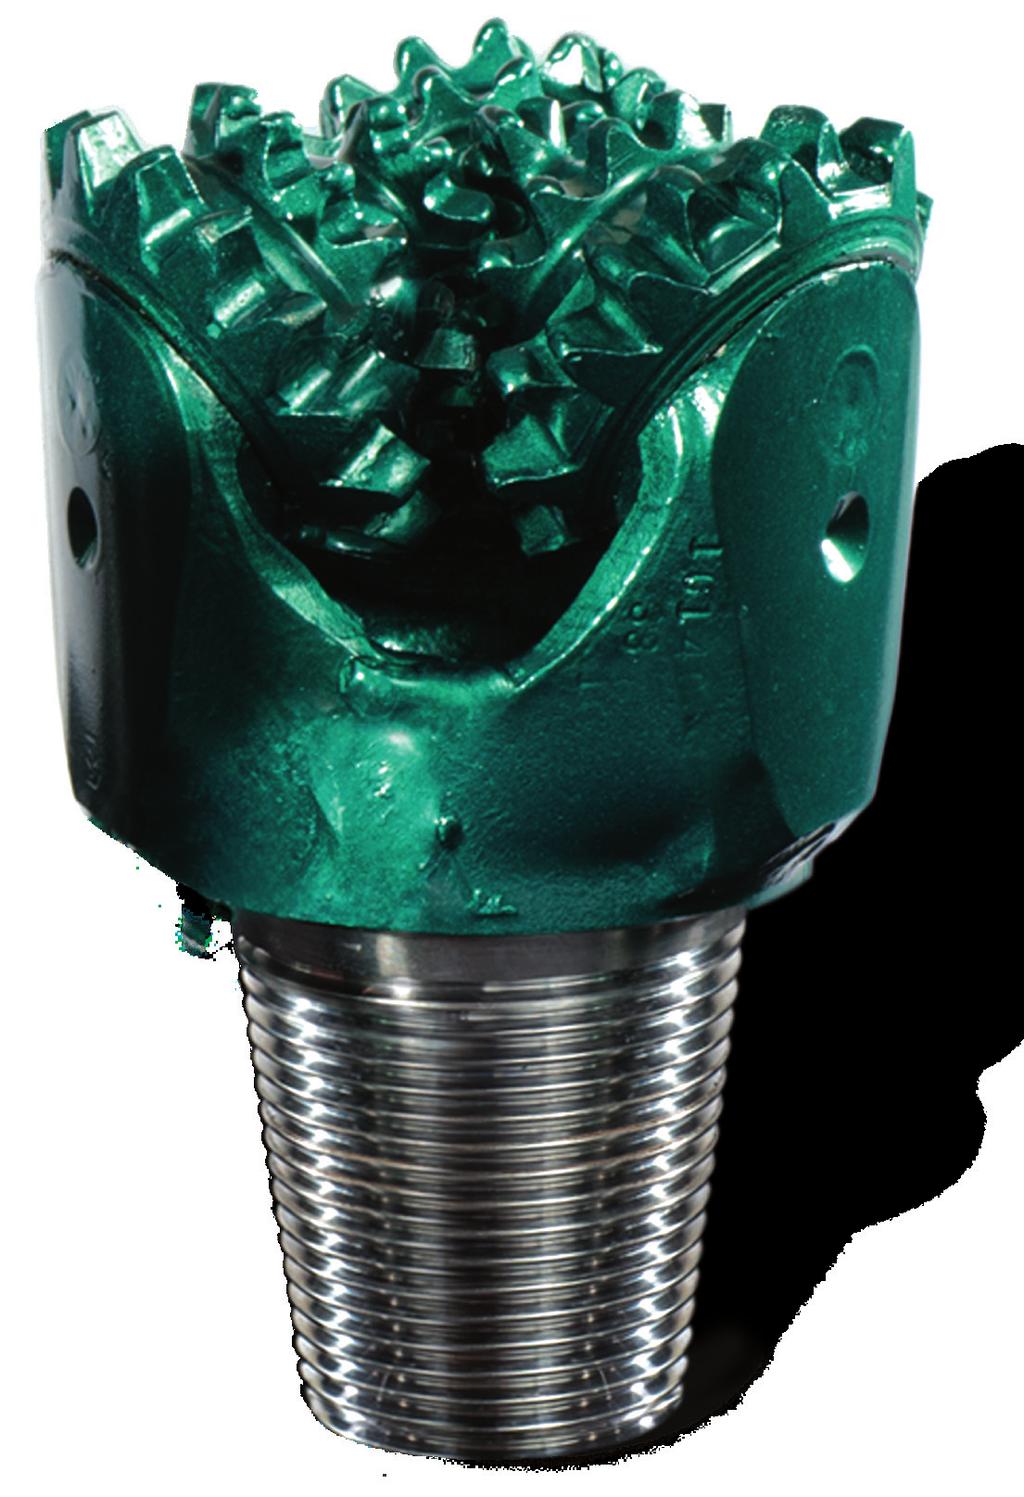 Workover Bits Varel International offers the industry's broadest selection of high quality drill bits for remedial, re-entry and frac plug drilling applications including: Our classic open bearing